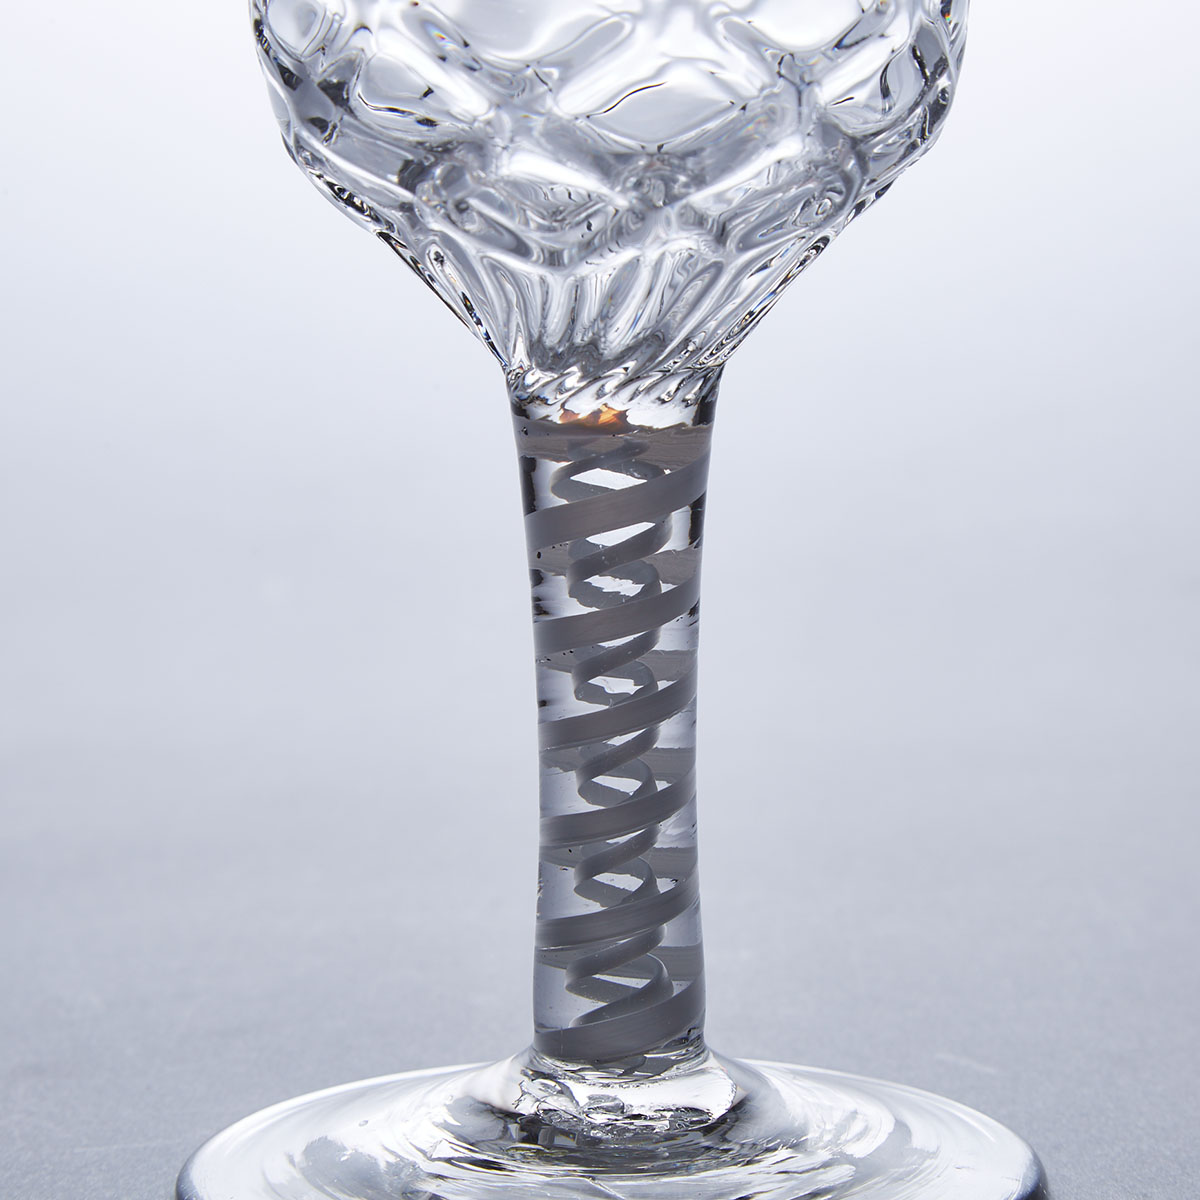 English Honeycomb Moulded Opaque Twist Stemmed Glass Goblet, c.1760-80